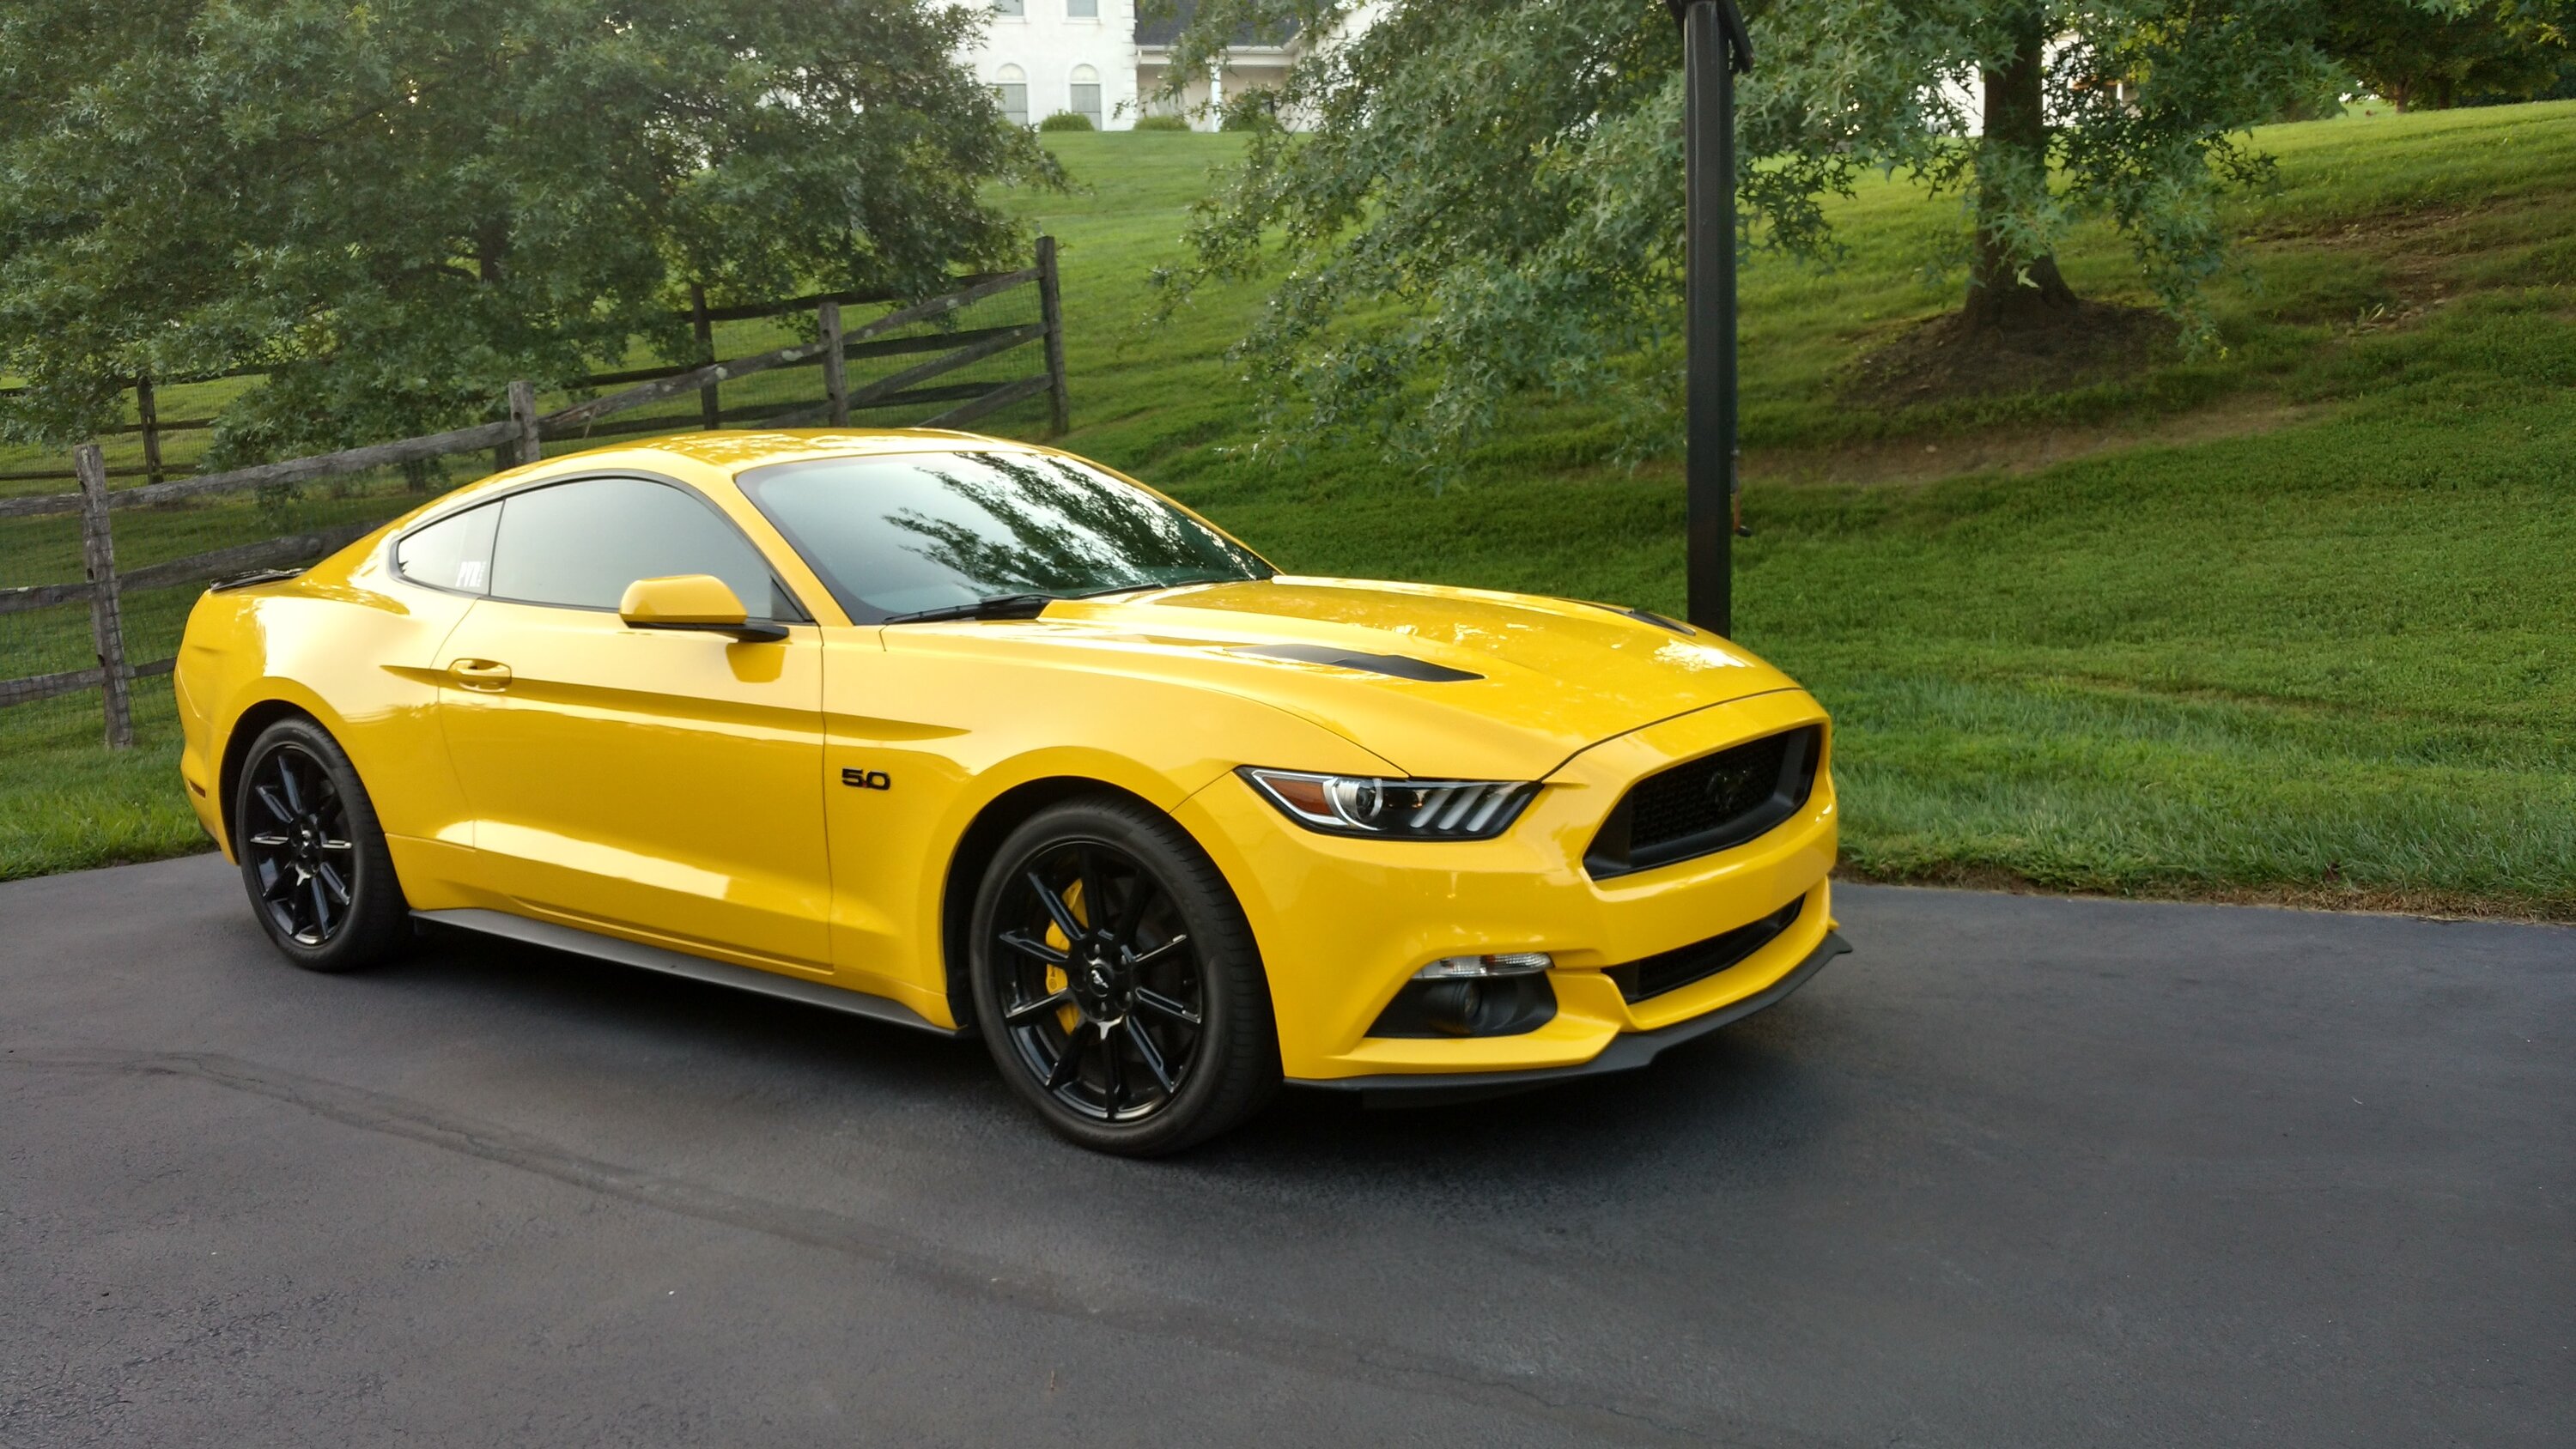 S650 Mustang Official YELLOW SPLASH Mustang S650 Thread IMG_20170819_190114985_HDR